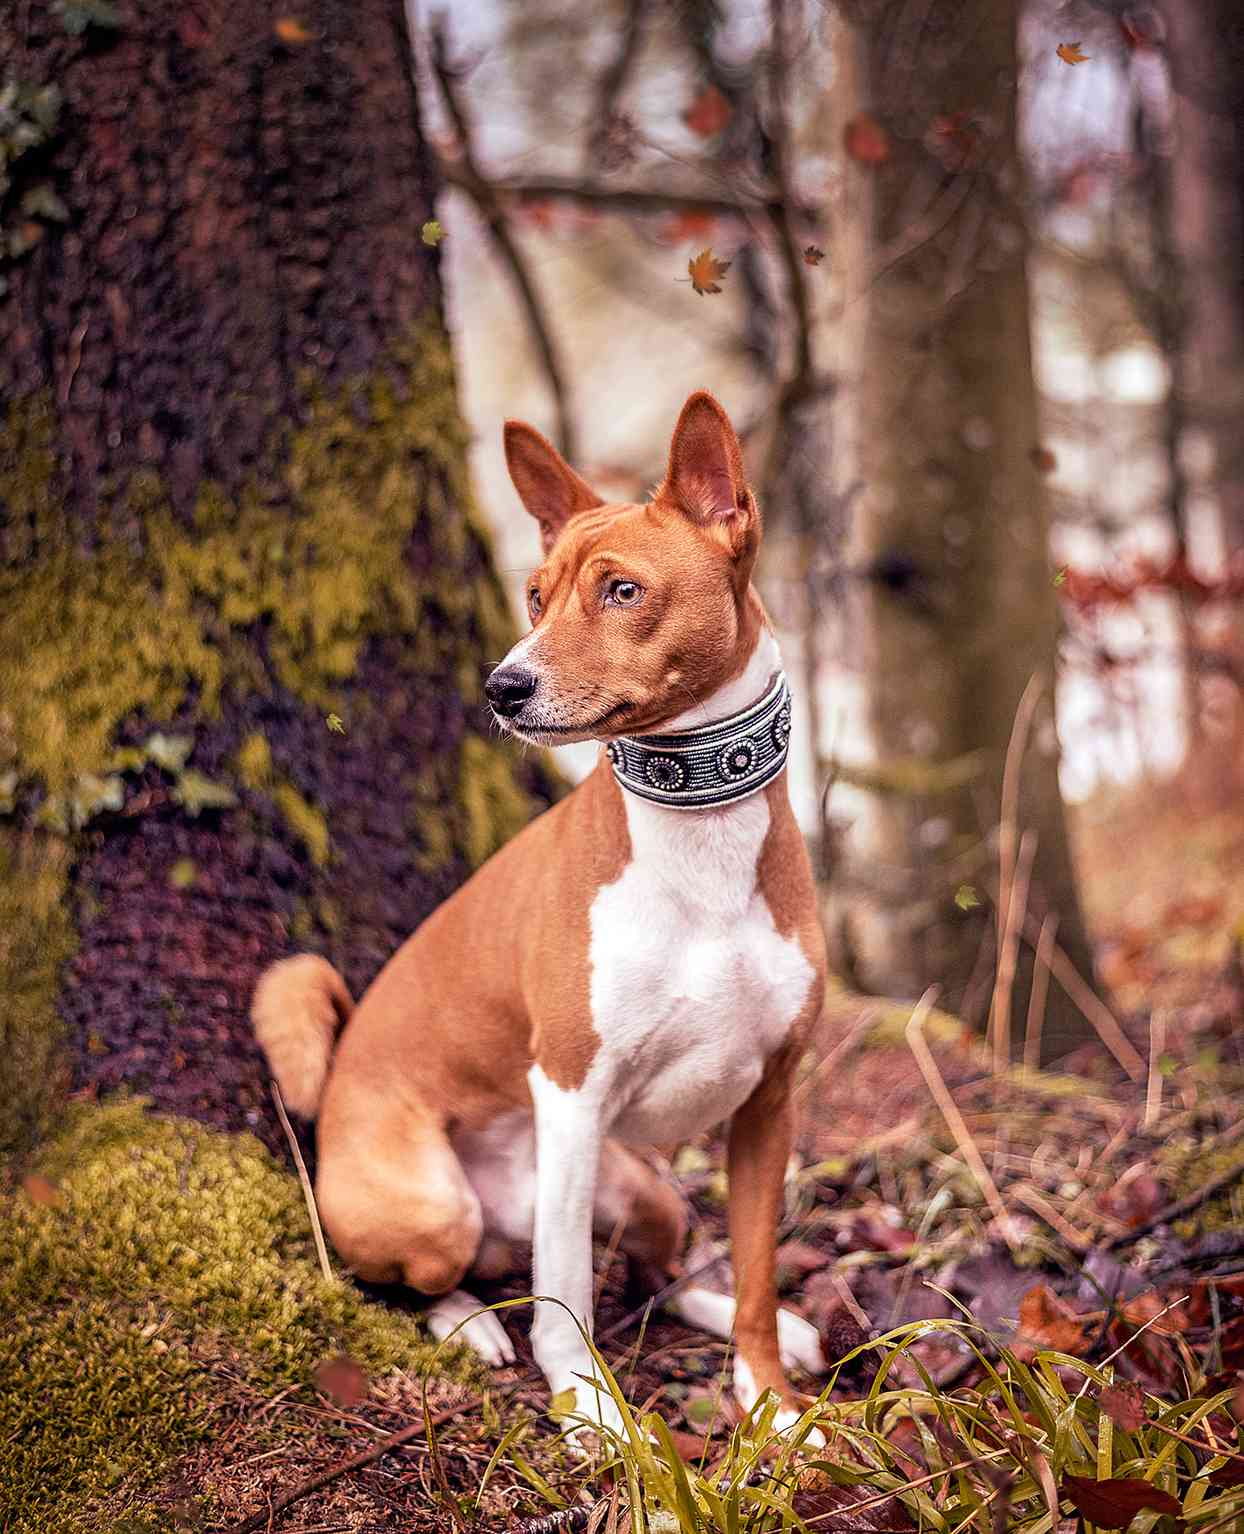 basenji wearing a decorative collar sitting on a mossy tree in a forest